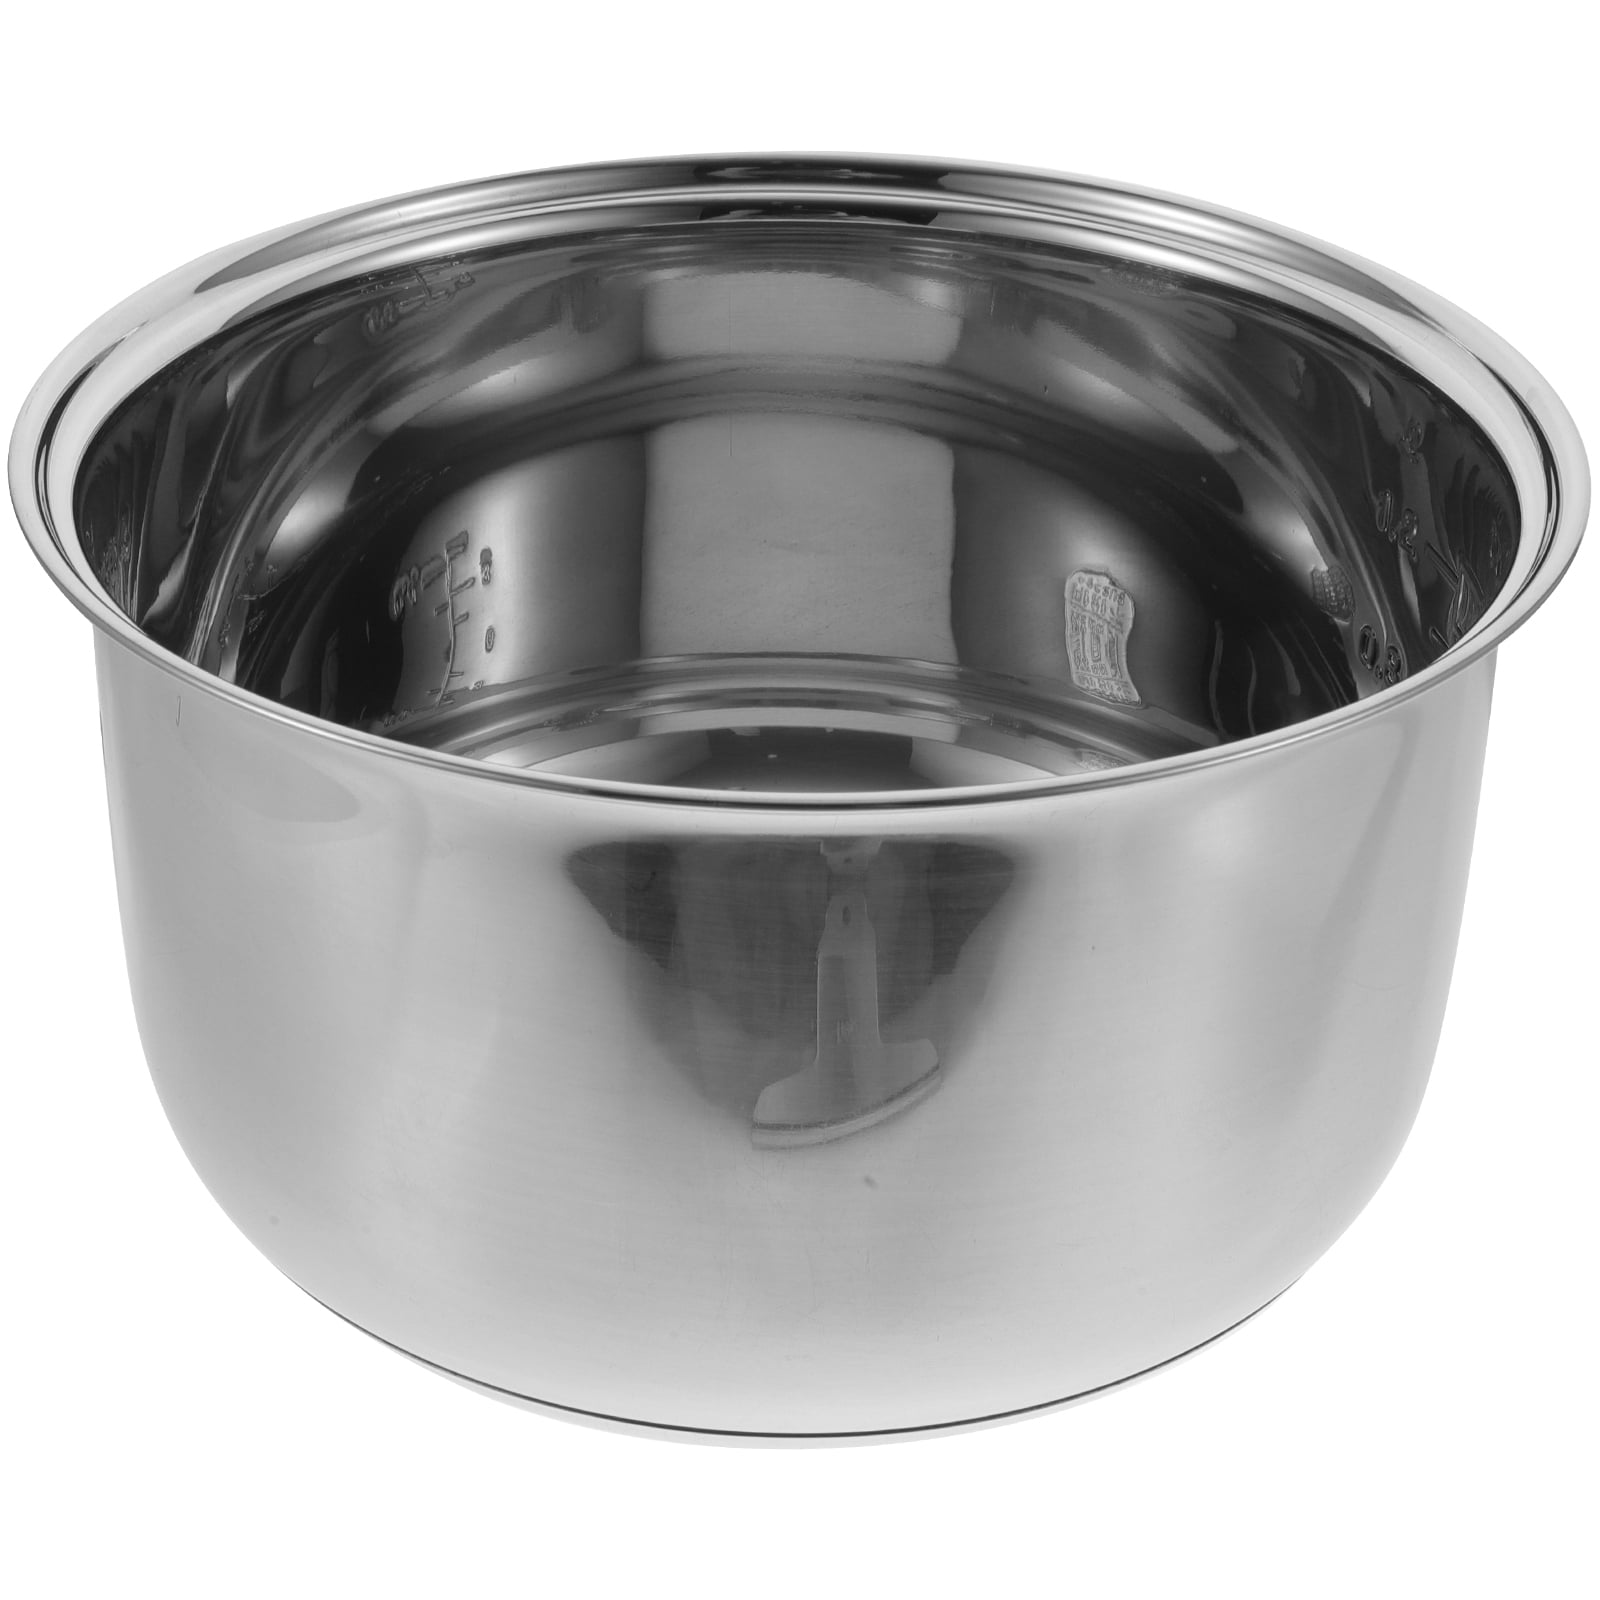 Rice Cooker Inner Pot: Inner Cooking Pot 4L Cooking Pot Liner Stainless  Steel Rice Container Replacement for Electric Rice Maker Pressure Cooker